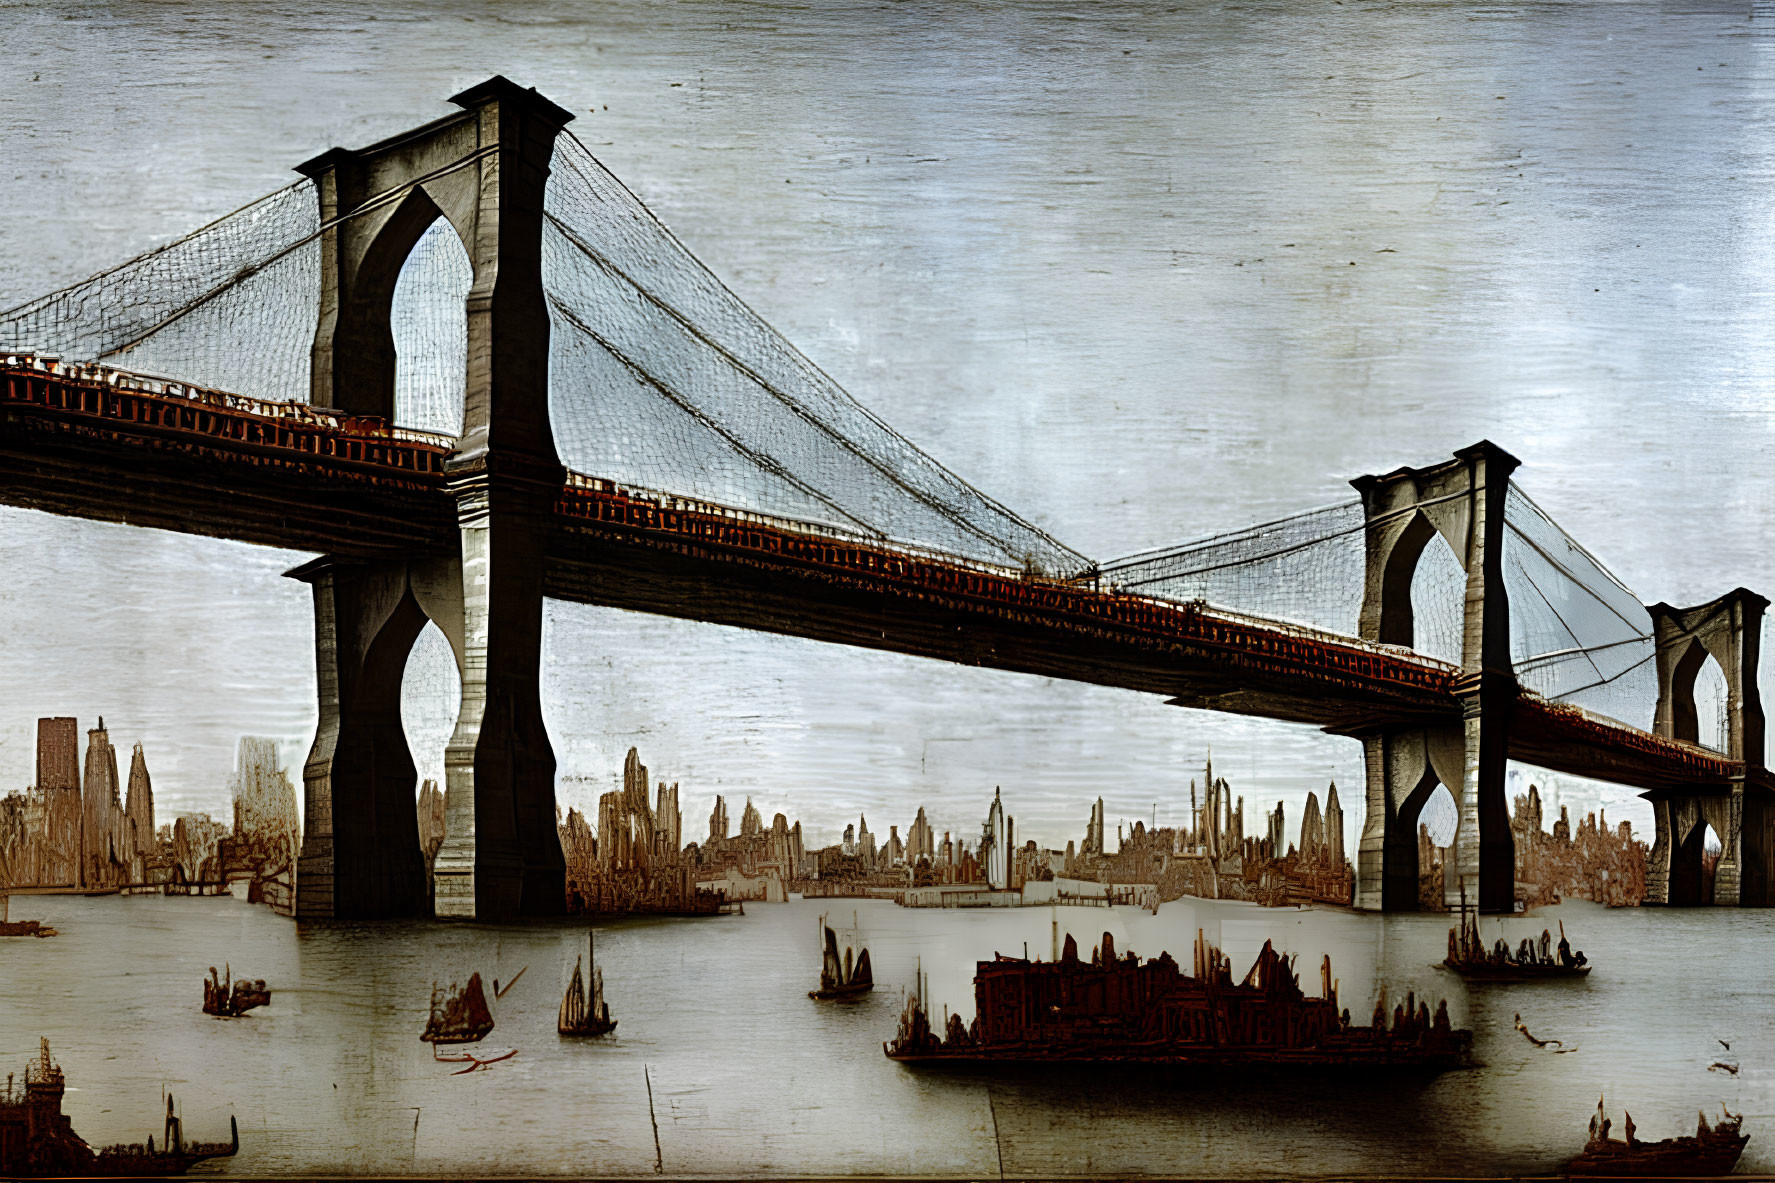 Illustration of vintage suspension bridge over water with boats and city skyline